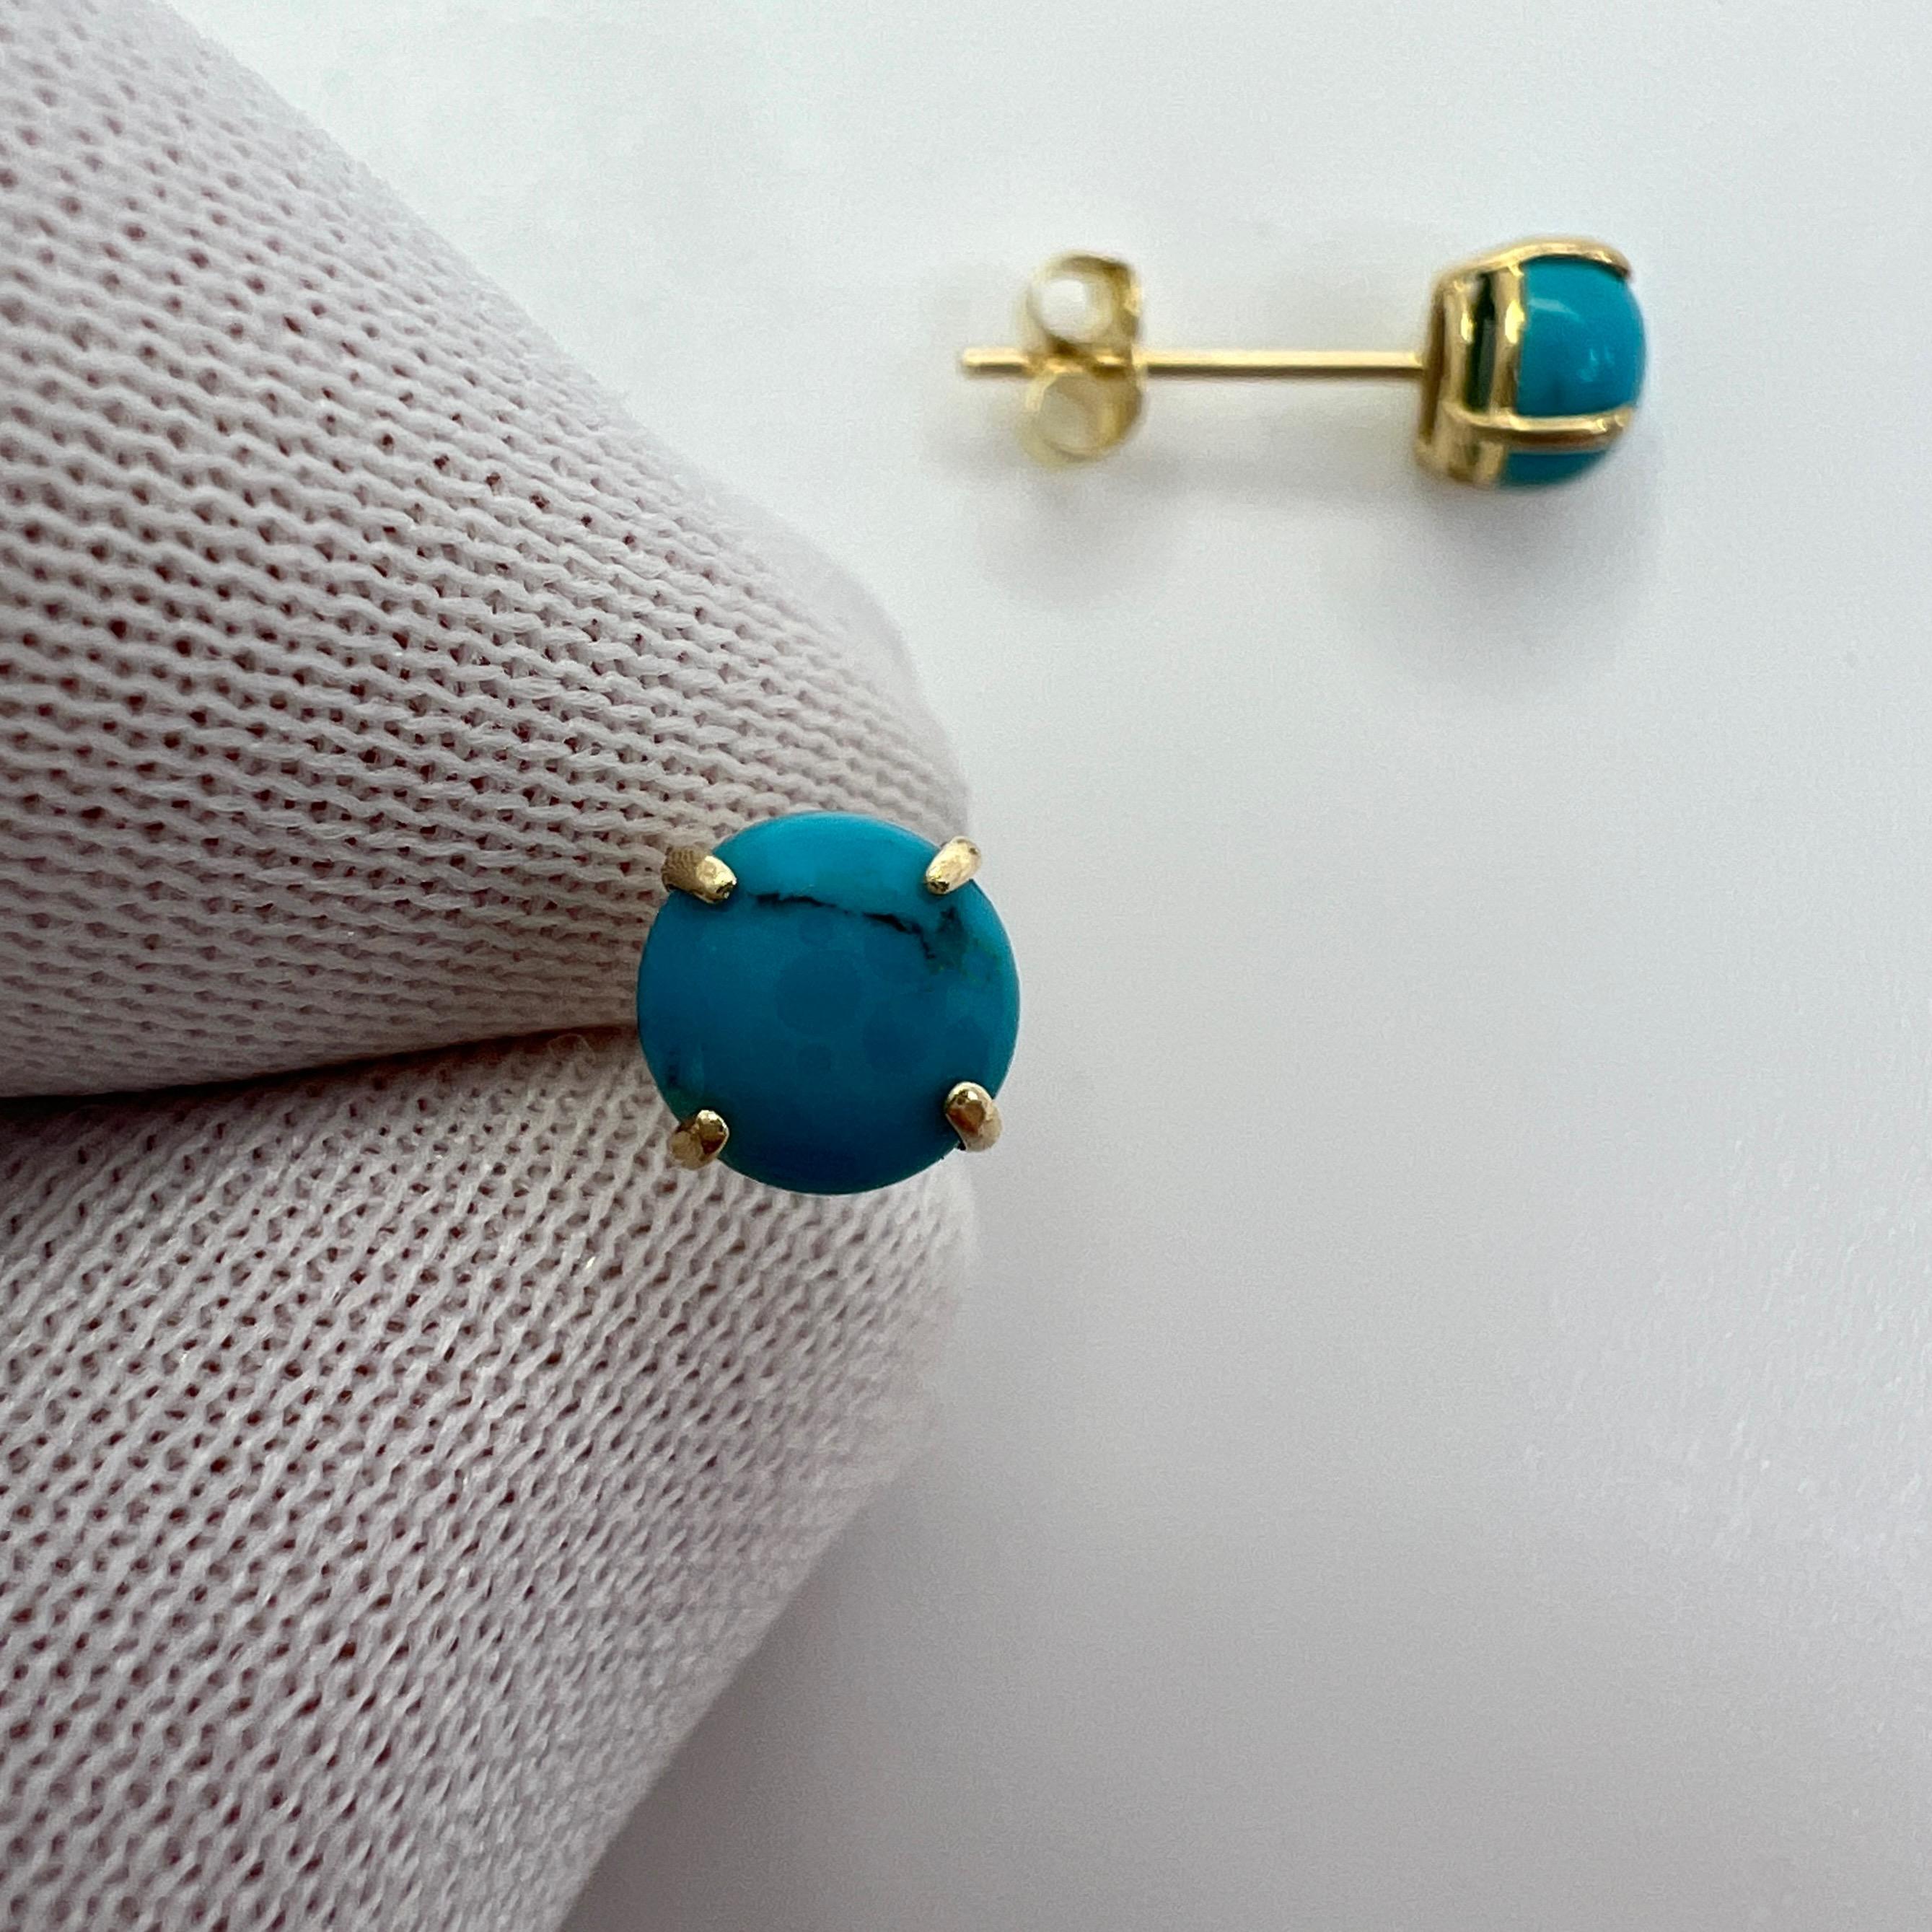 Natural Blue Turquoise 5mm Round Cabochon 9k Yellow Gold Stud Earrings For Sale 1